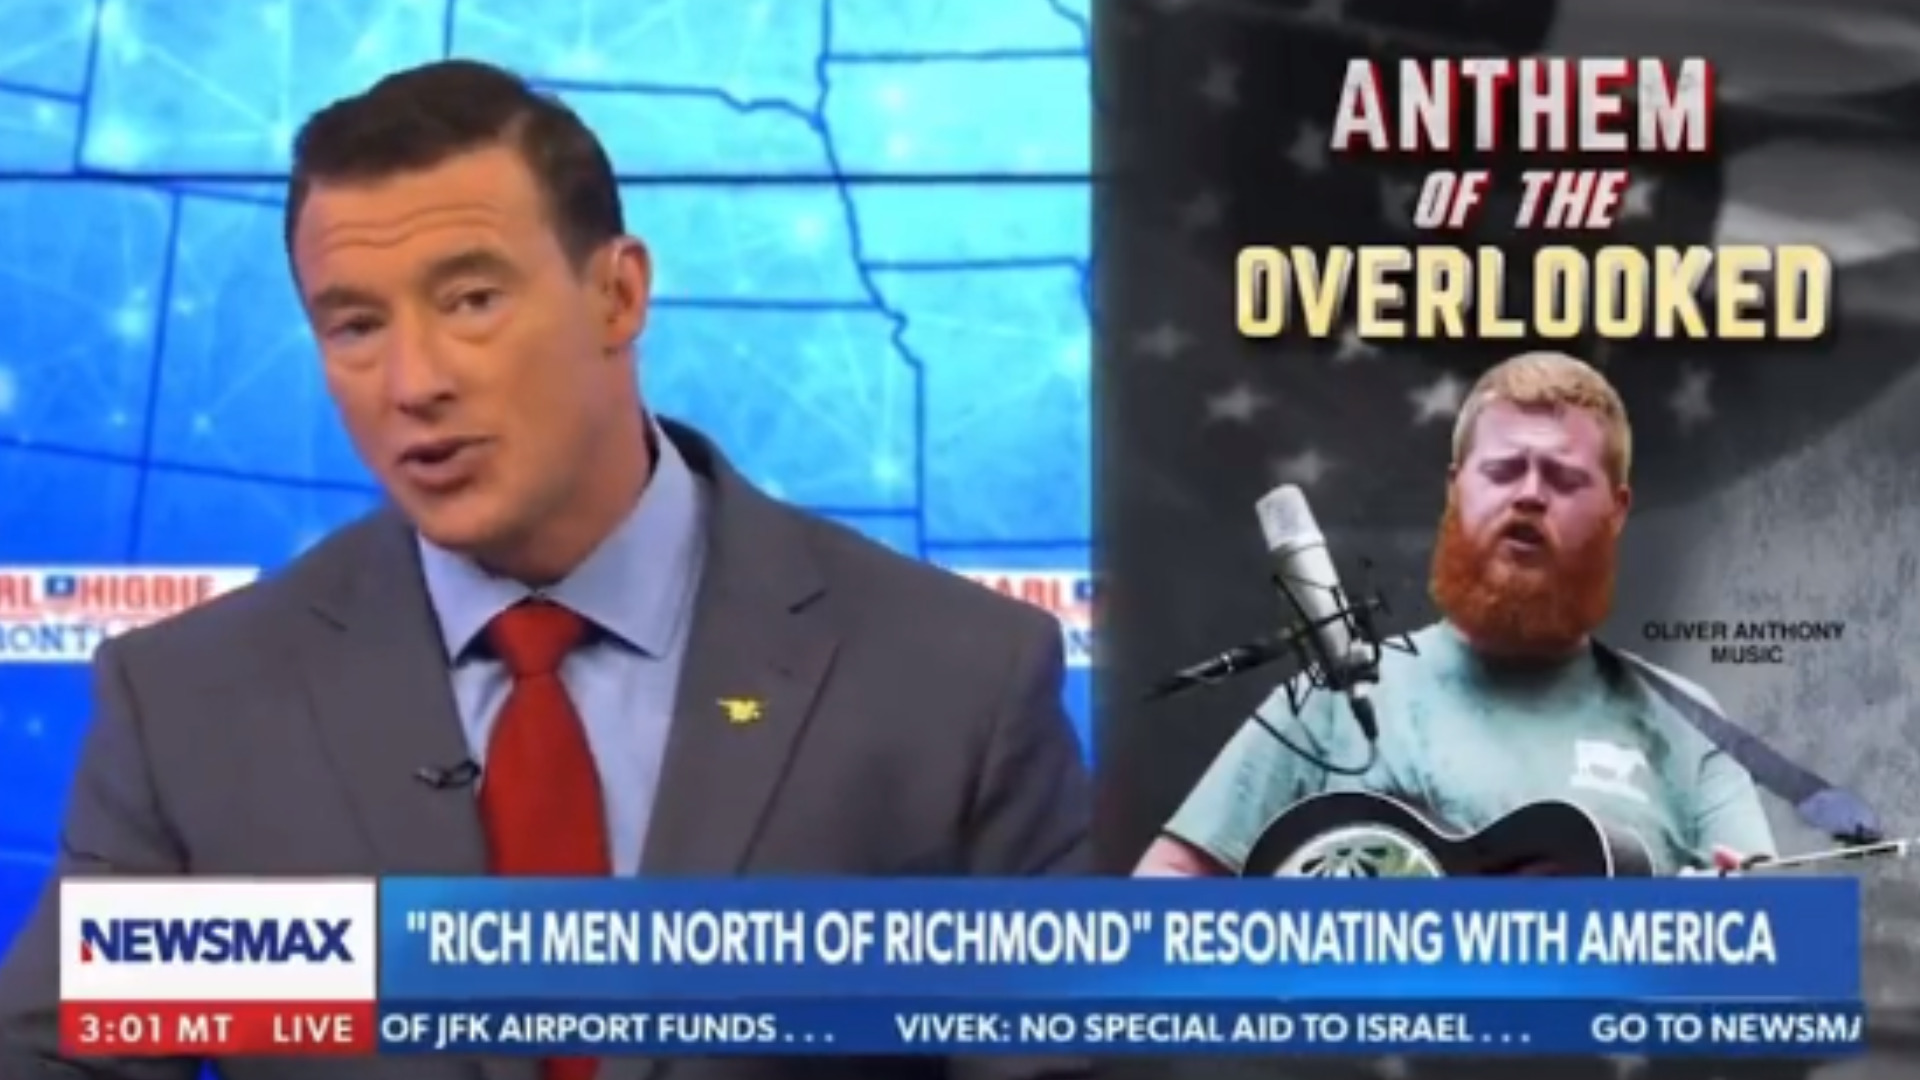 Rich Men North of Richmond is the anthem of the overlooked